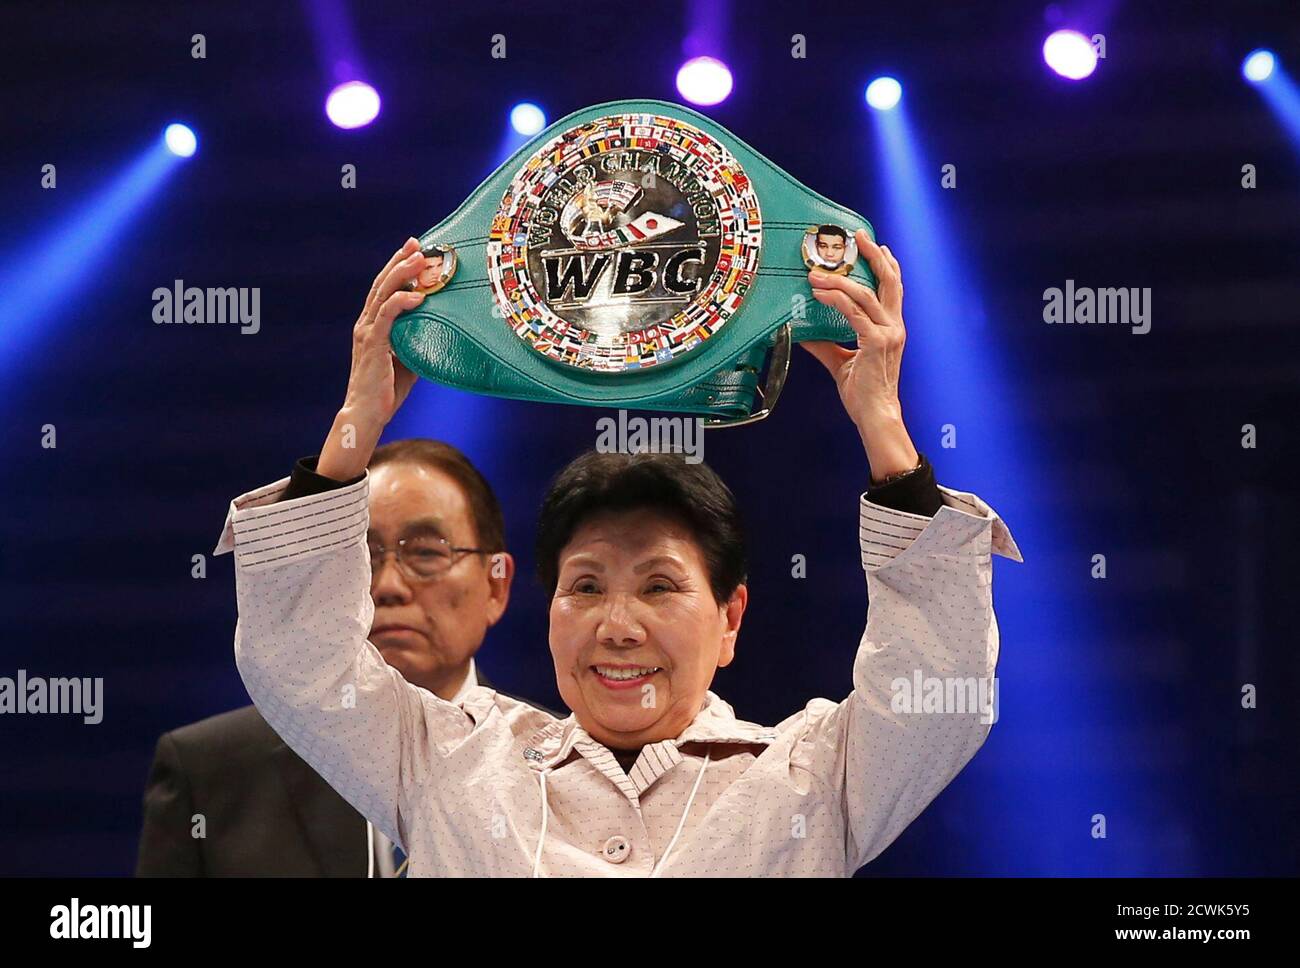 Page 2 Wbc Championship Belt High Resolution Stock Photography And Images Alamy